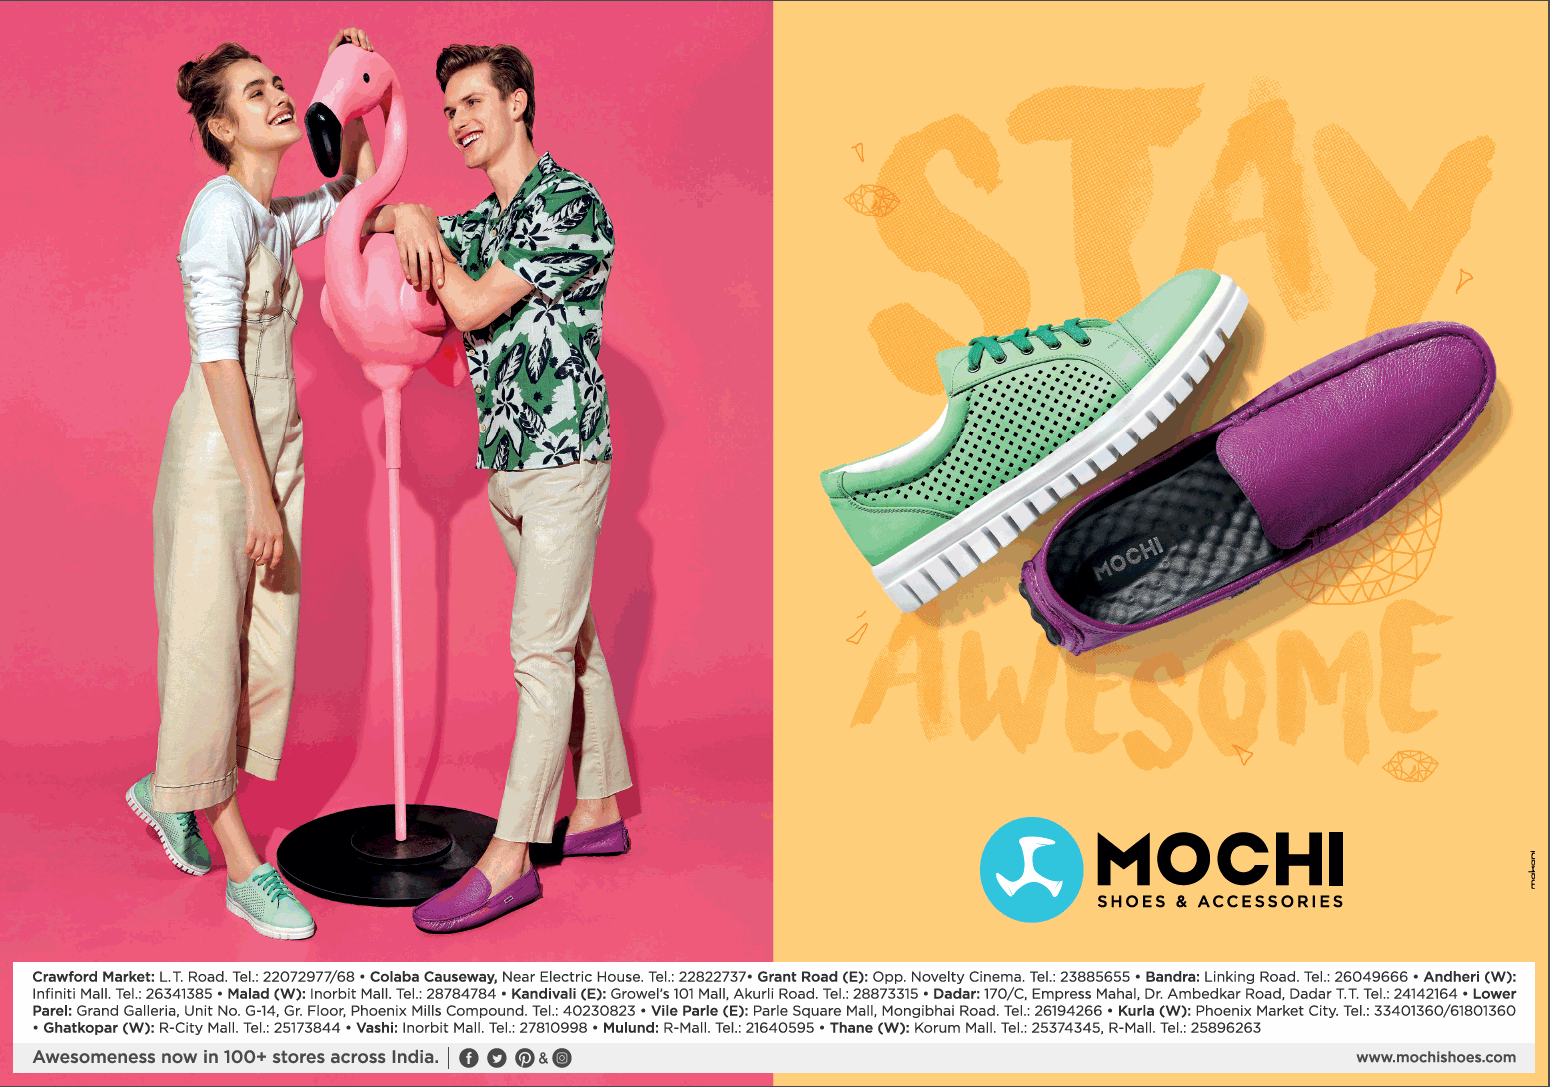 Mochi Shoes And Accessories Stay Awesome Ad - Advert Gallery